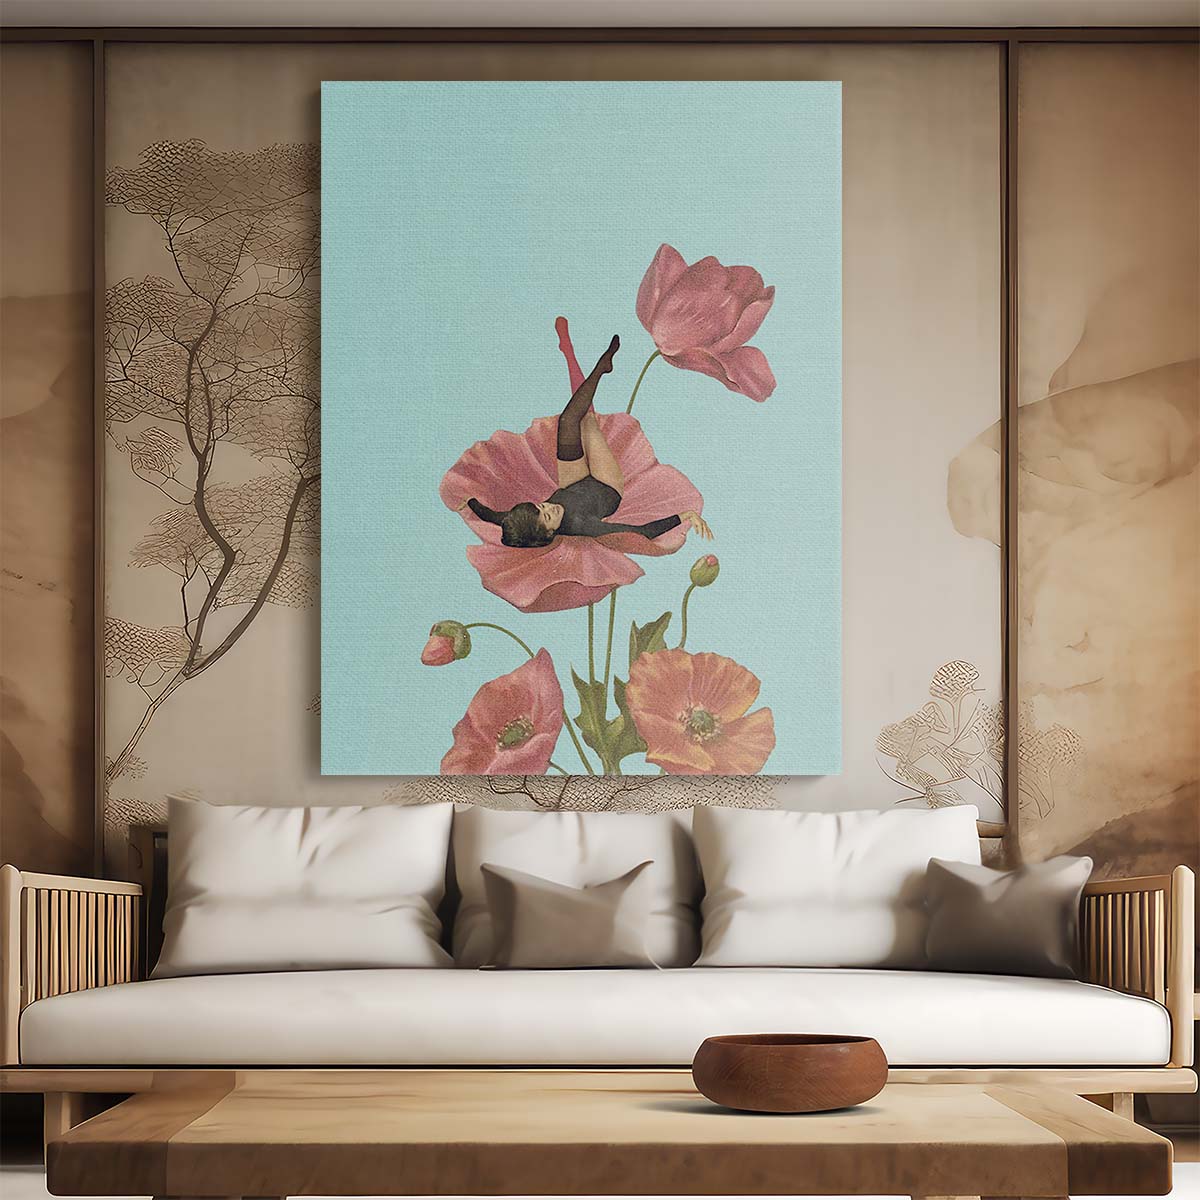 Mid-Century Floral Illustration Art, 'Colourful Dreamer' by Maarten Leon by Luxuriance Designs, made in USA